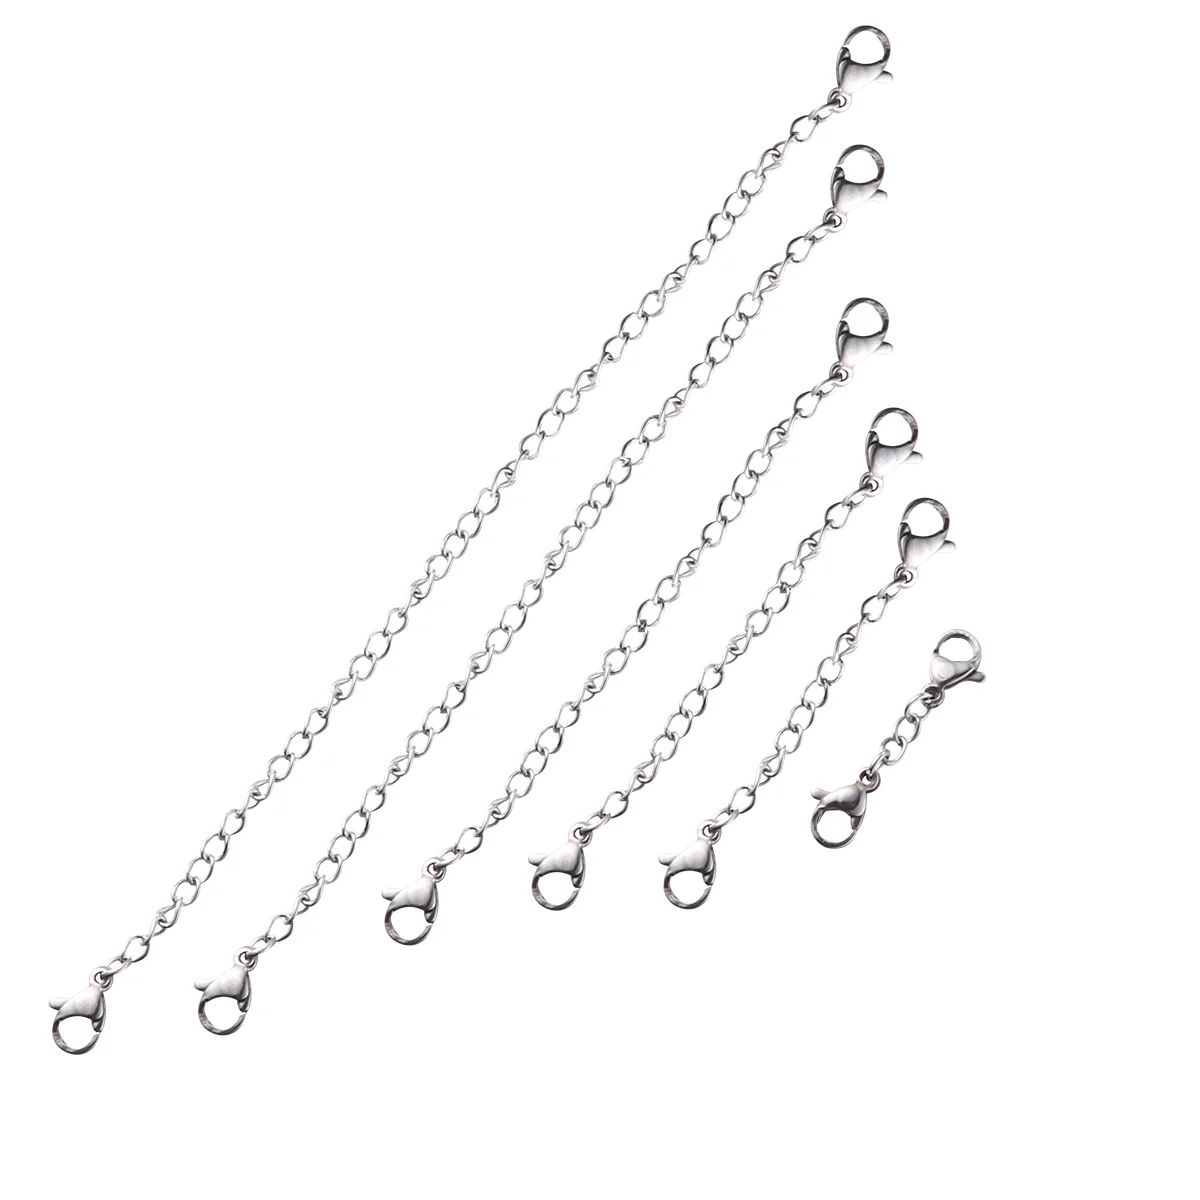 

6pcs Necklace Extender Stainless Steel Bracelet Necklace Anklet Chain Extension with Lobster Clasps for DIY Craft Jewelry